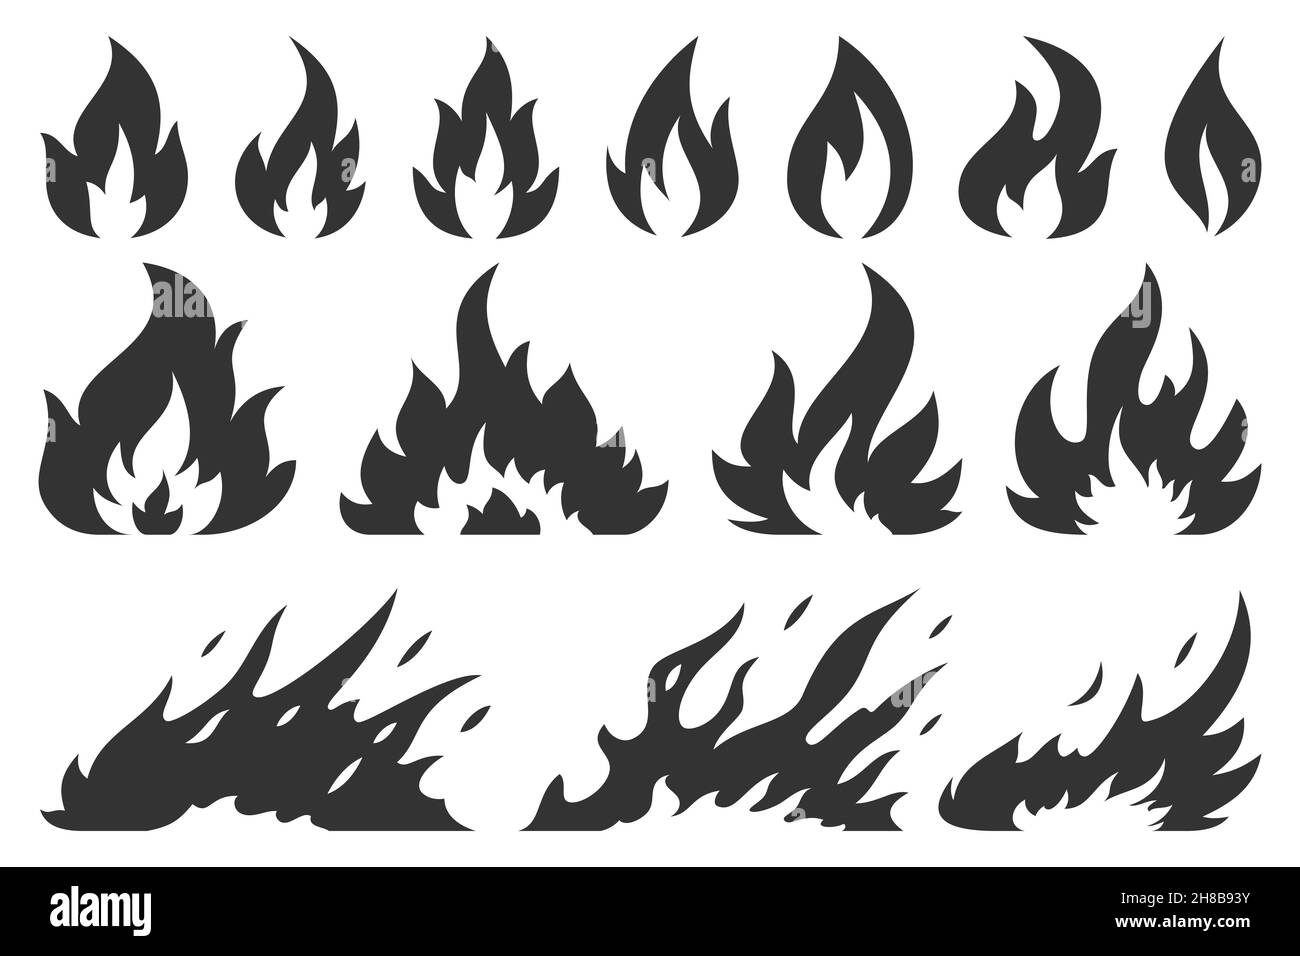 Fire bonfire ignition flames black silhouette set. Stamp flame energy fiery explosion hot outline warning symbols. Collection sign icon danger ignition object forest fires flammable isolated on white Stock Vector